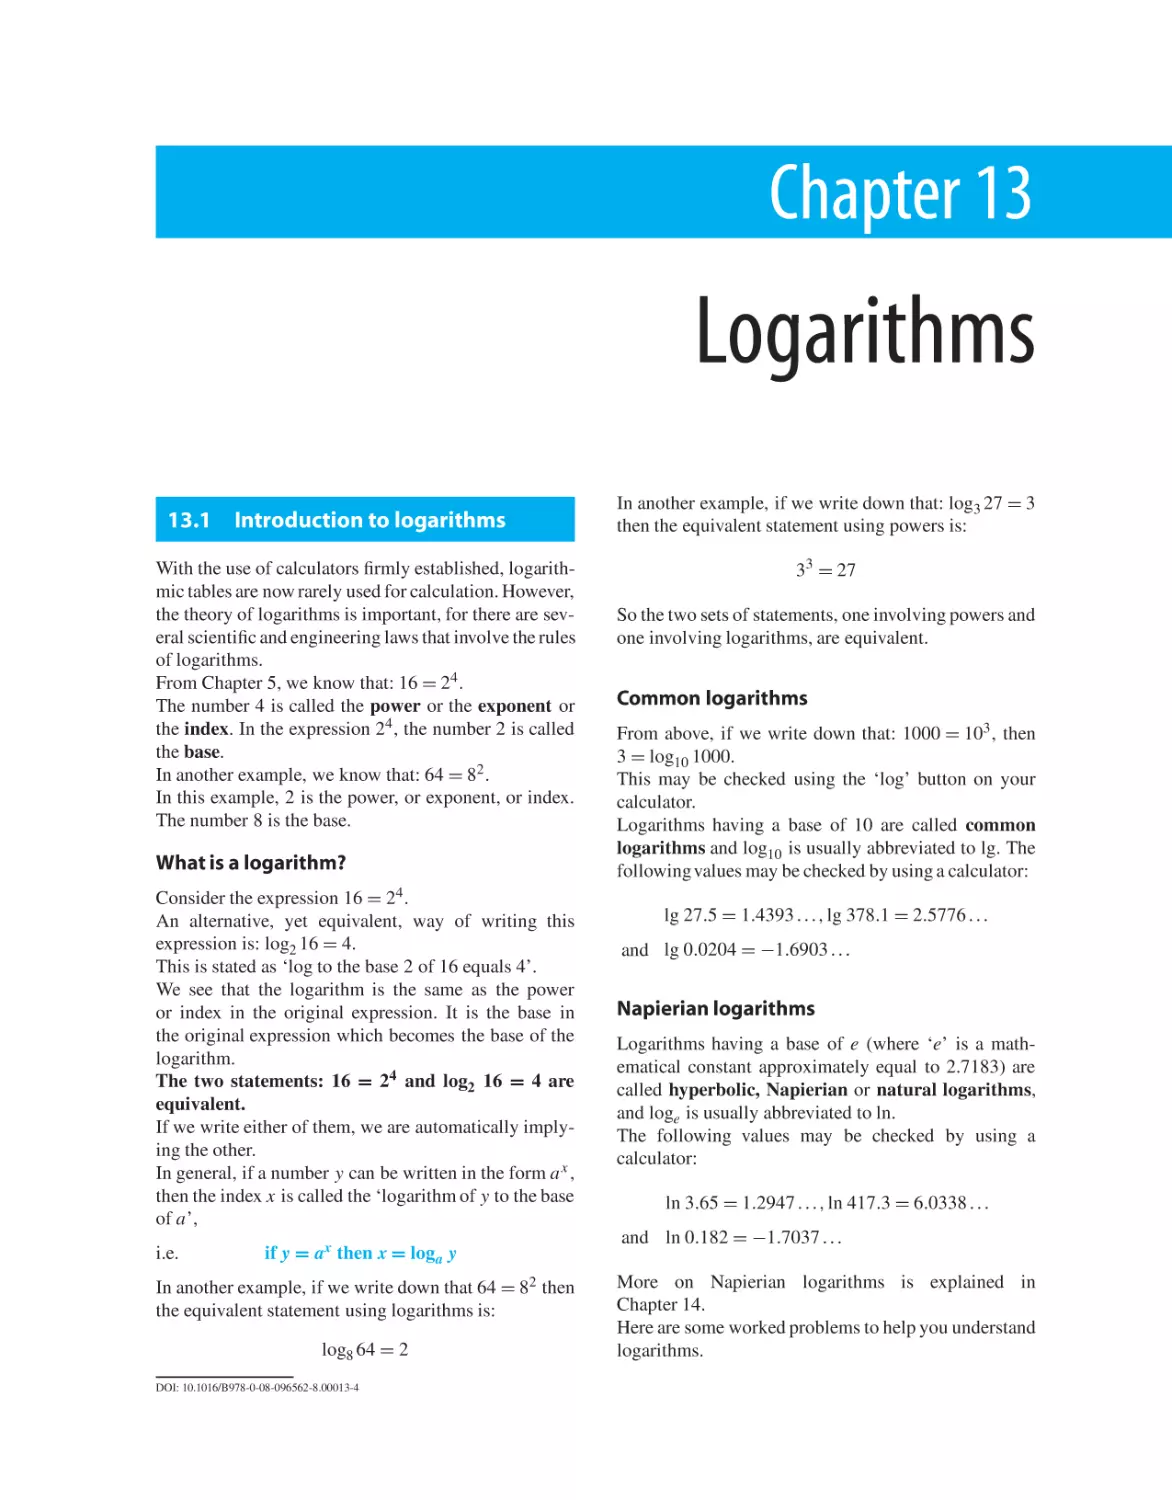 Chapter 13. Logarithms
13.1 Introduction to logarithms